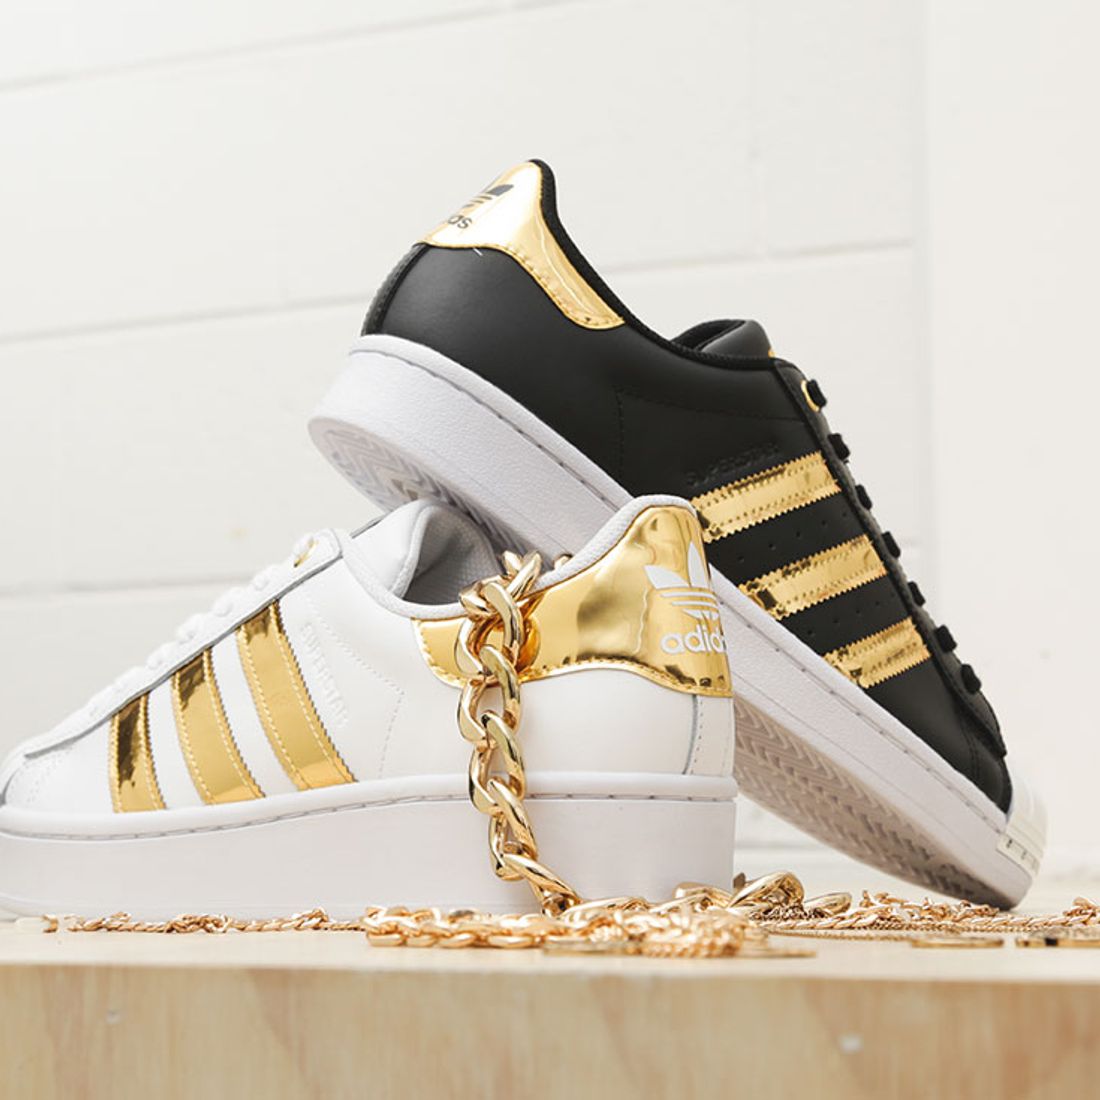 last nabootsen Kantine The adidas Superstar Goes for Gold in its 50th Year - Sneaker Freaker